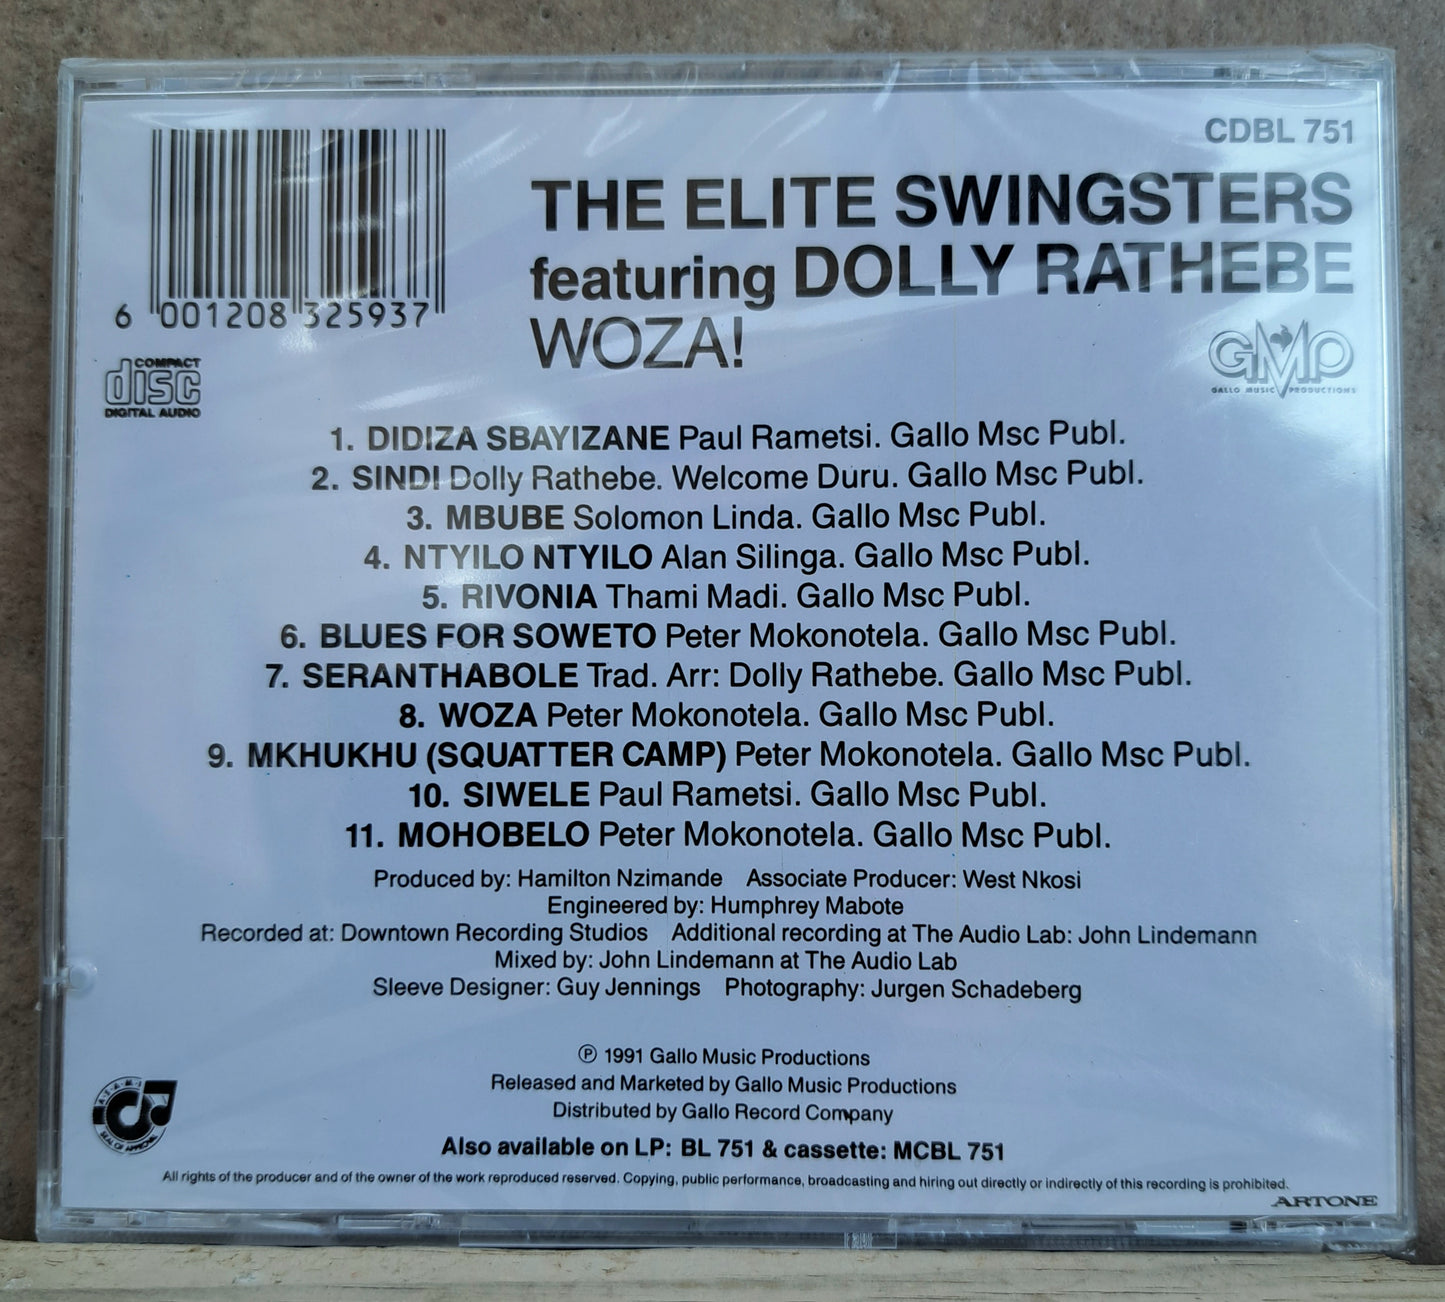 The Elite Swingsters - Woza! (featuring Dolly Rathebe) cd, new/ sealed